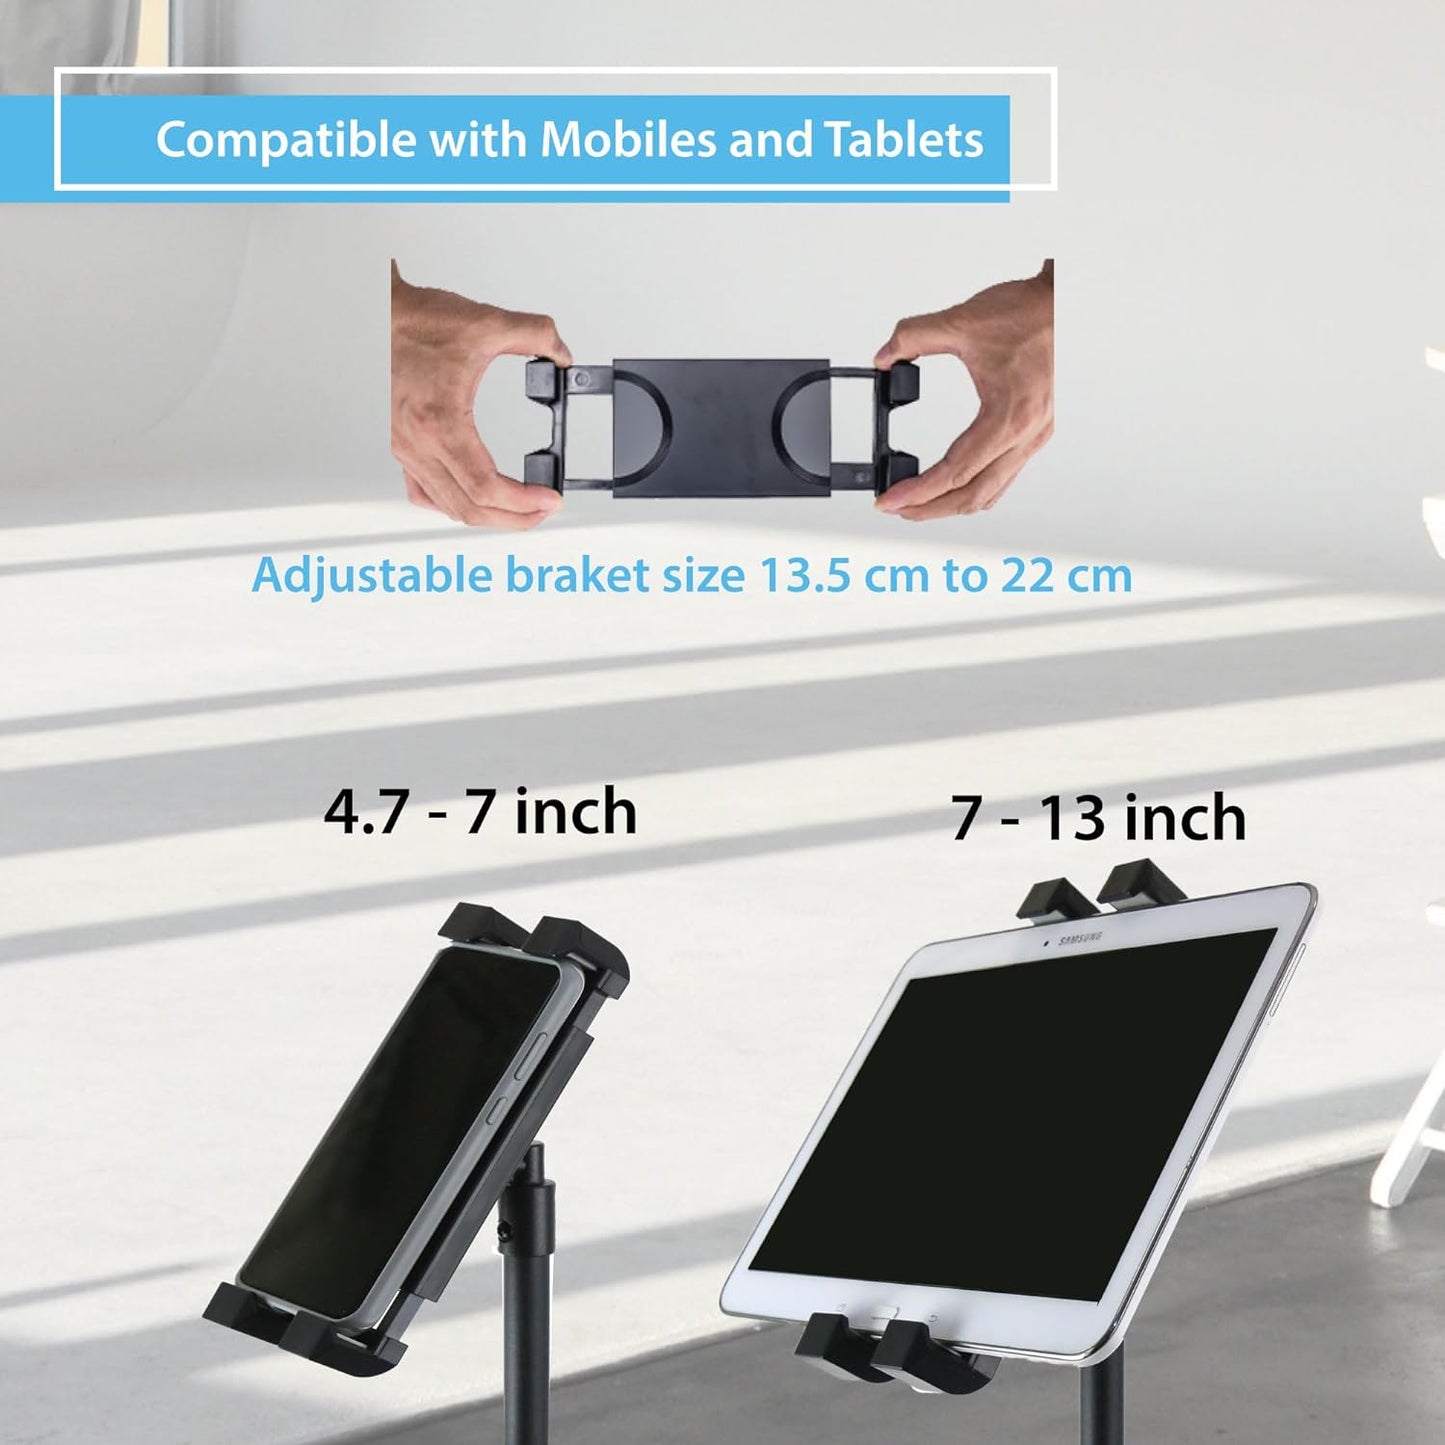 Technomounts Telescopic Tripod Tablet Stand for Tablets 6" to 13"Tablet Floor Stand for IPad 12.9"